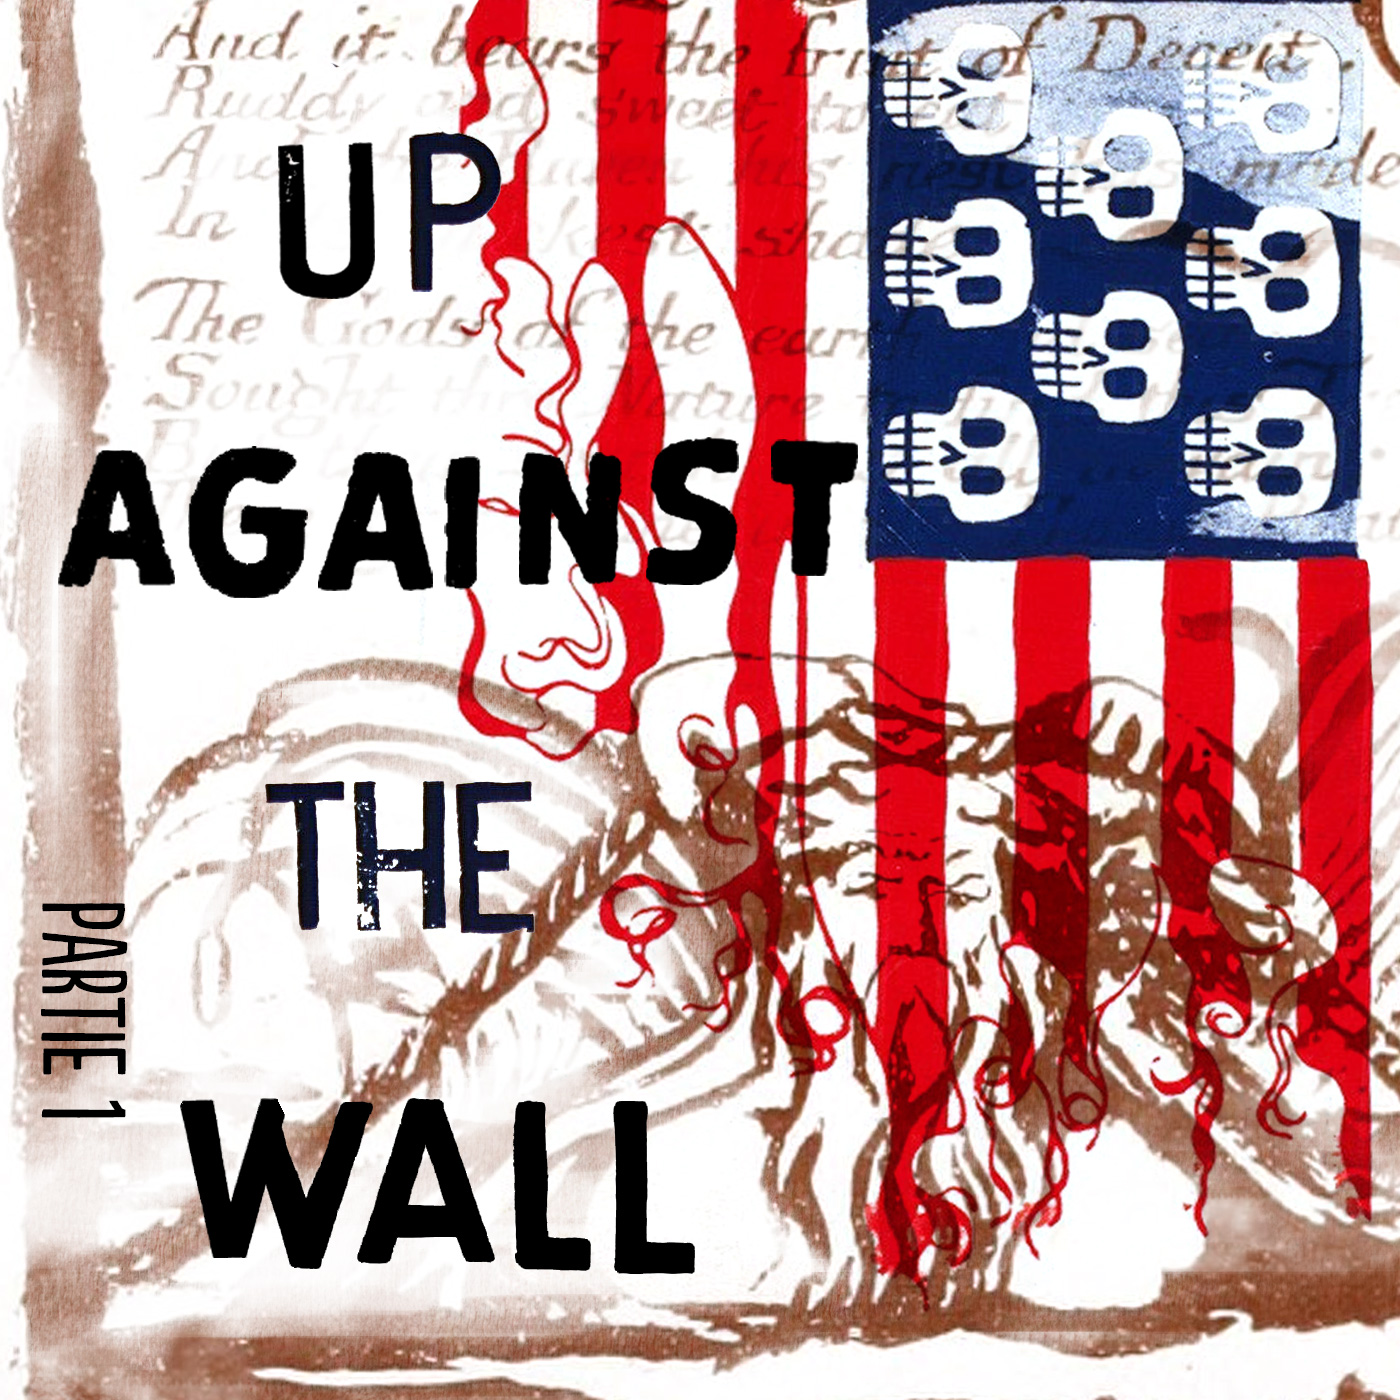 UpAgainstTheWall 1c - Radio Clash Podcast Up Against The Wall - Psych Mix Part 1 Radio Clash Music Mashup Podcast brings you the best in eclectic tunes, mashups and remixes from around the world. Since 2004, we've been bringing you the freshest and most innovative music from a diverse range of genres and cultures. Join us on our musical journey as we explore the sounds of yesterday, today, and tomorrow. Discover new music and be inspired by the mashup of musical styles that only Radio Clash can provide. Subscribe now to elevate your musical experience!